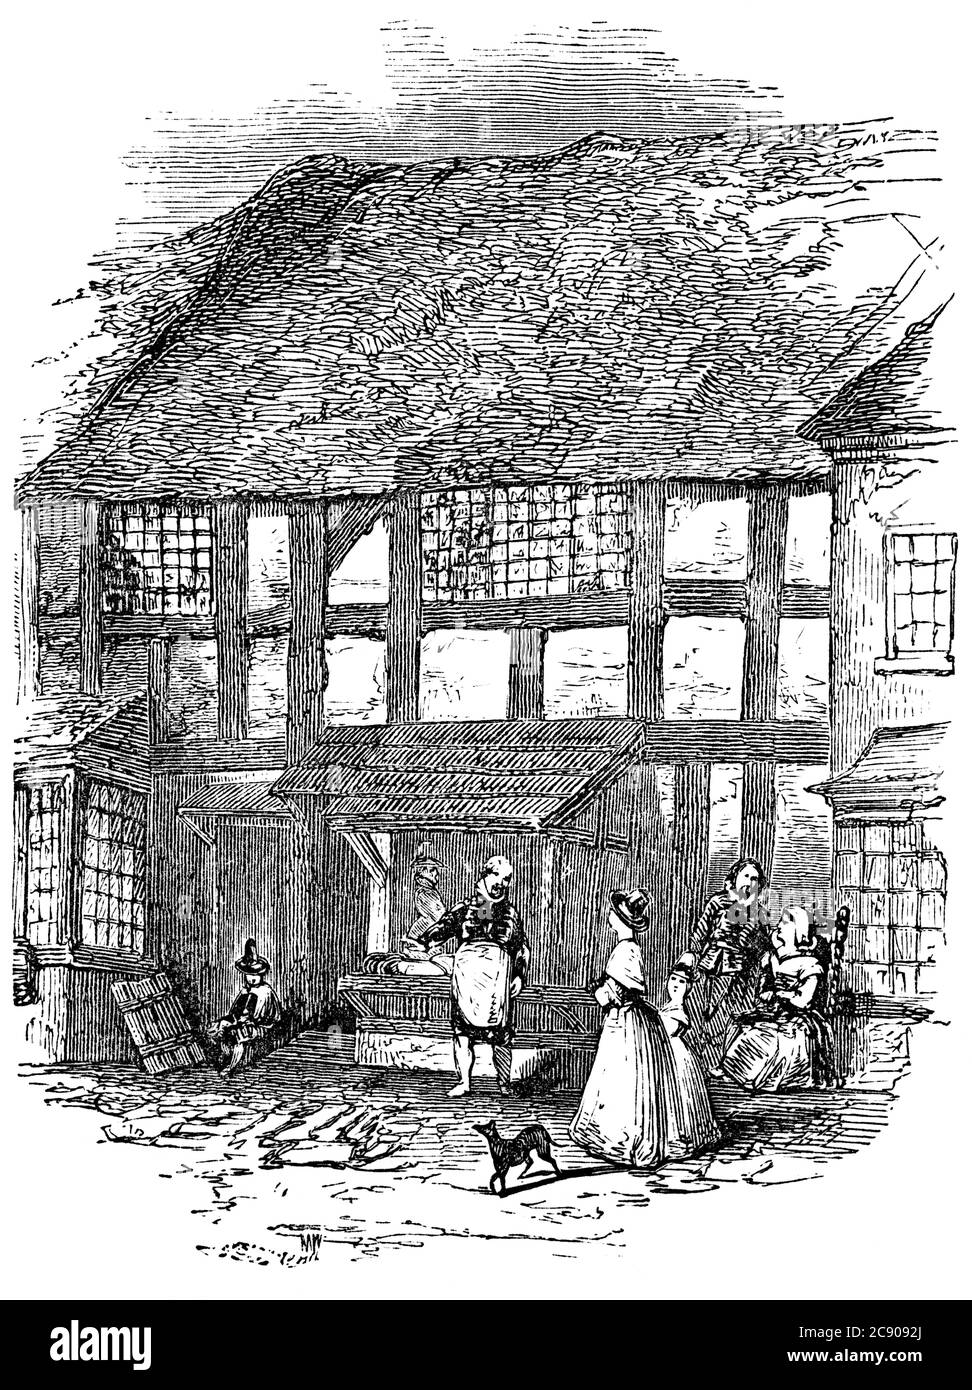 An engraved vintage illustration image portrait of the birthplace house of Elizabethan playwright William Shakespeare, from a Victorian book dated 188 Stock Photo